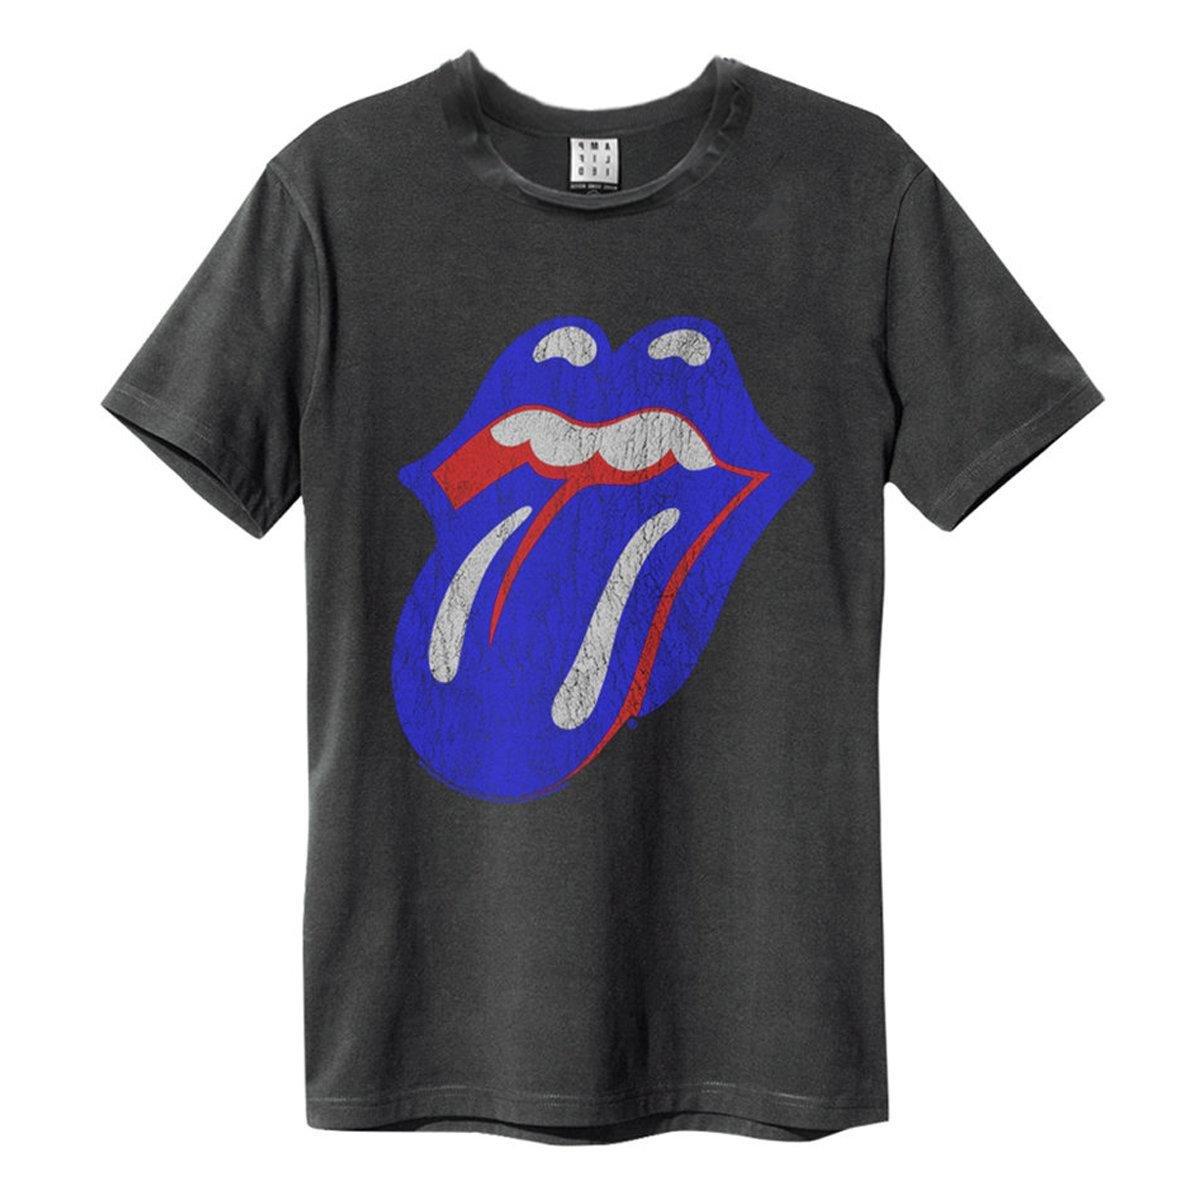 Blue And Lonesome Tshirt Damen Charcoal Black M von Amplified